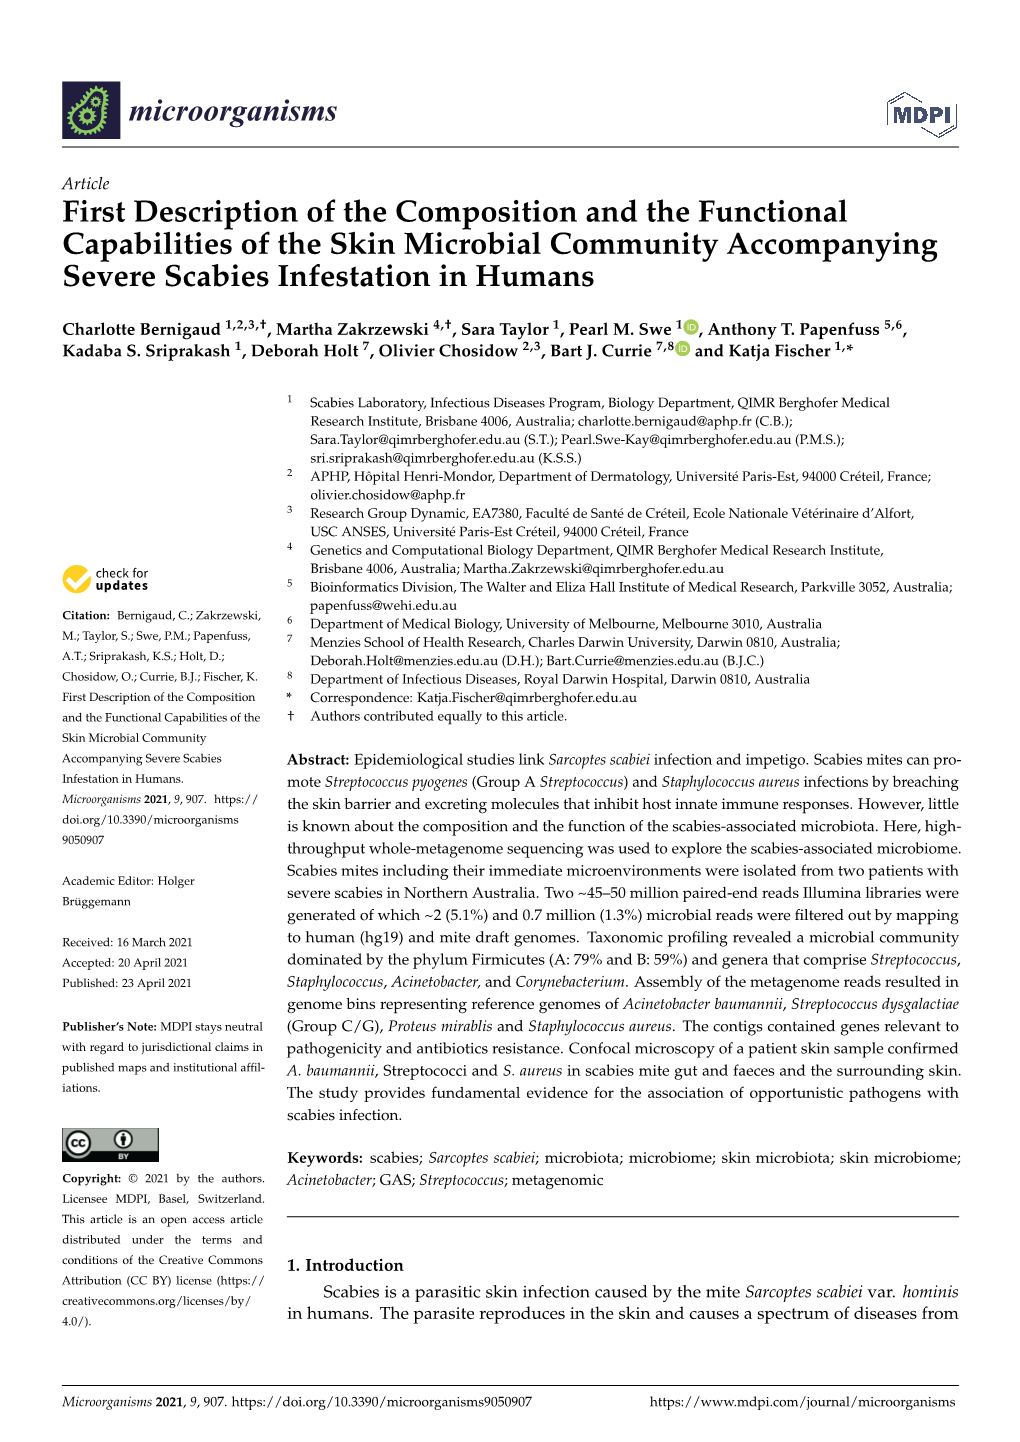 First Description of the Composition and the Functional Capabilities of the Skin Microbial Community Accompanying Severe Scabies Infestation in Humans